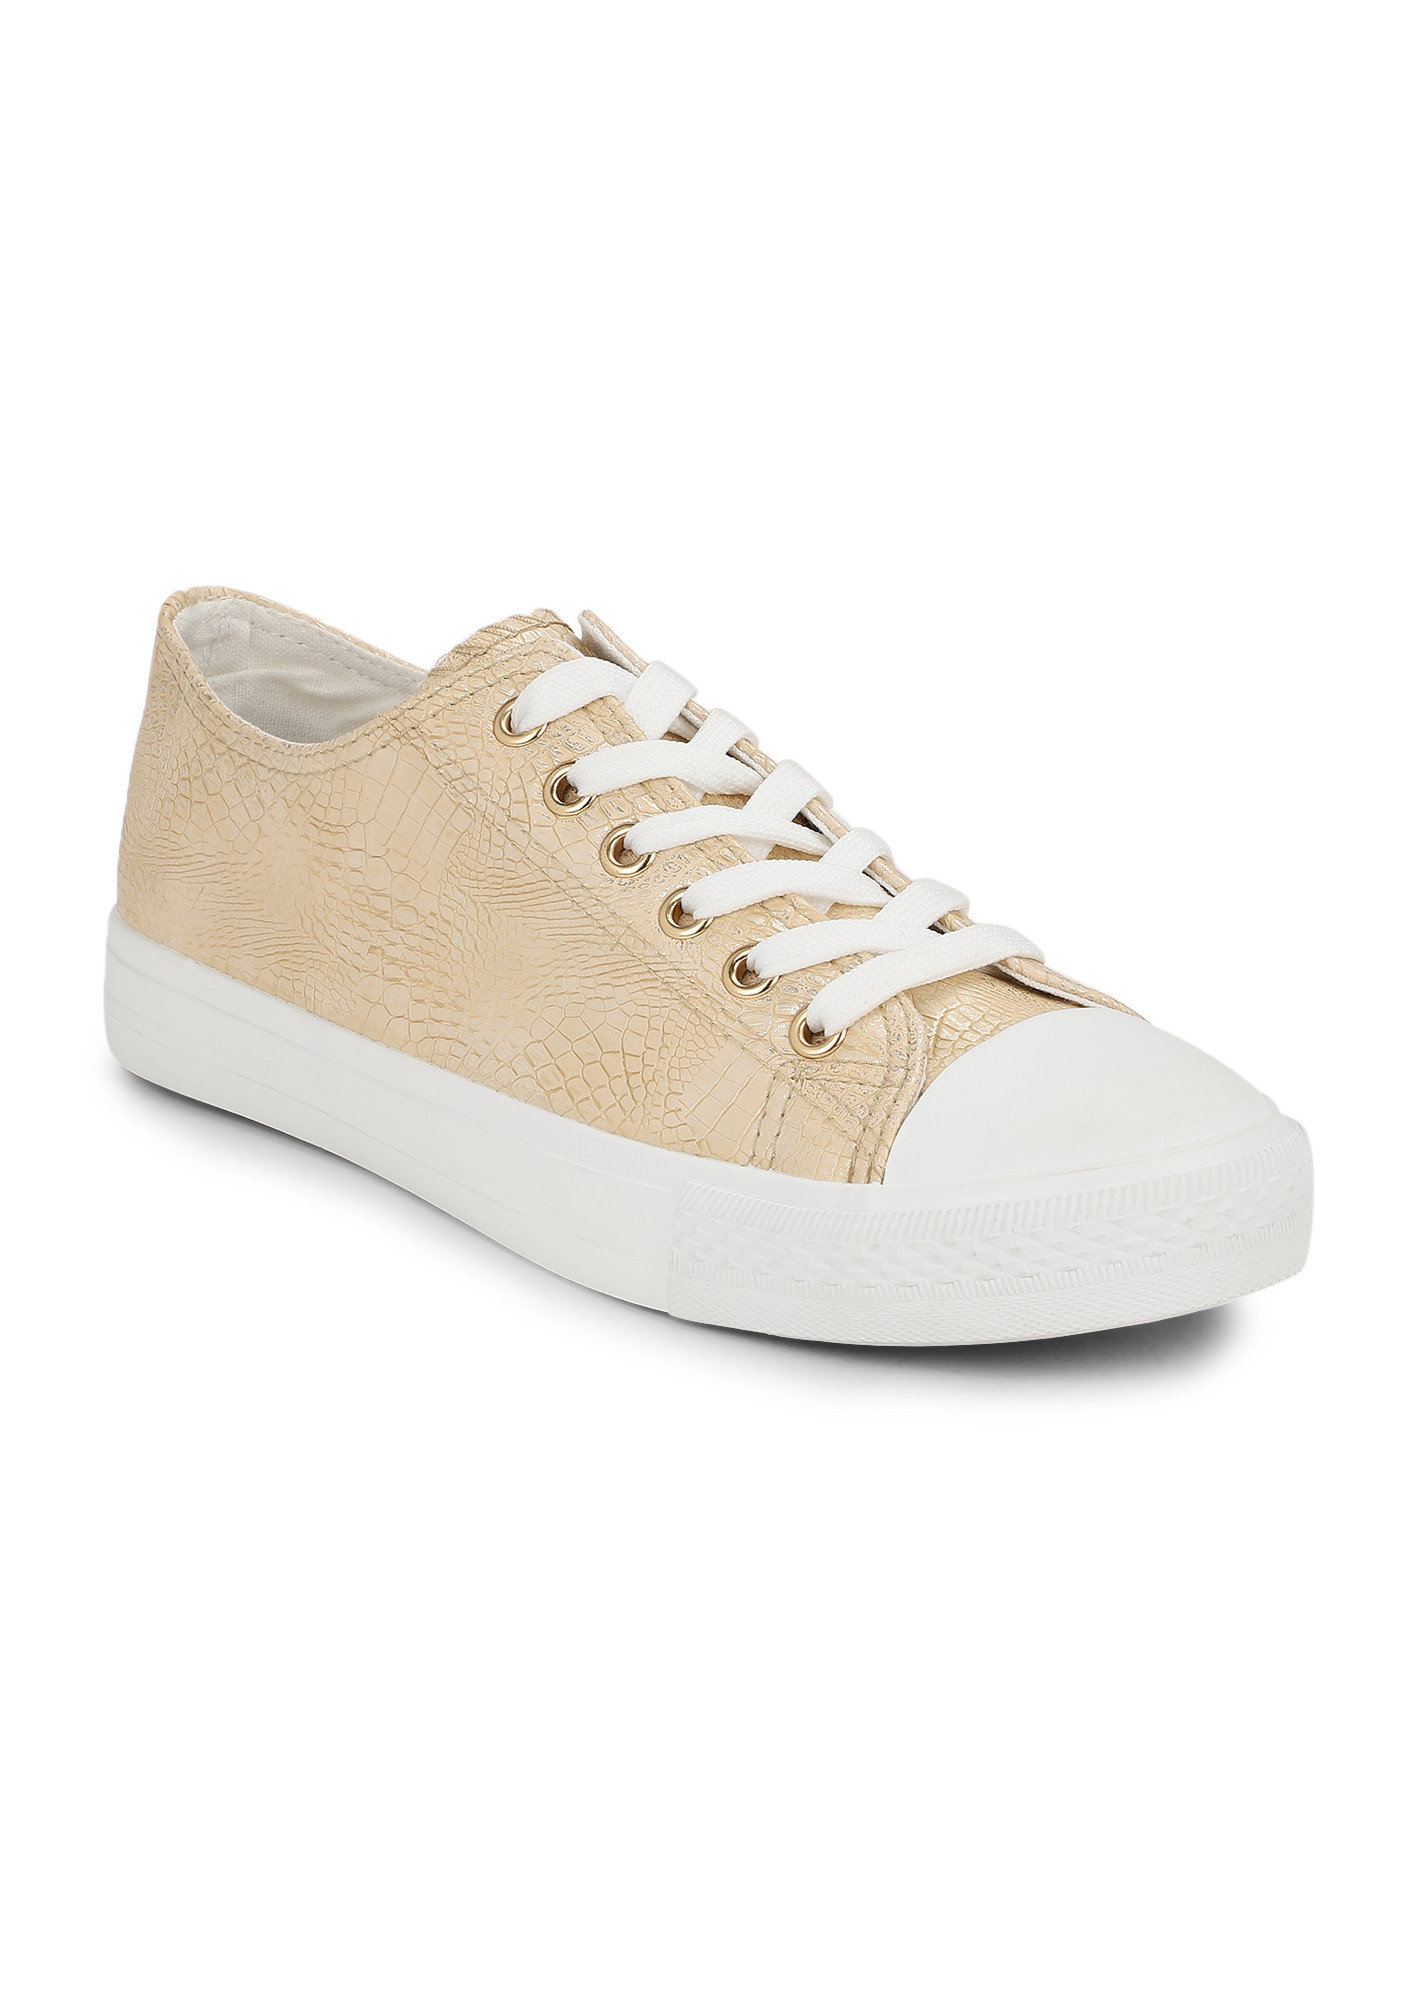 THE SHOW-STOPPER GOLD SNEAKERS